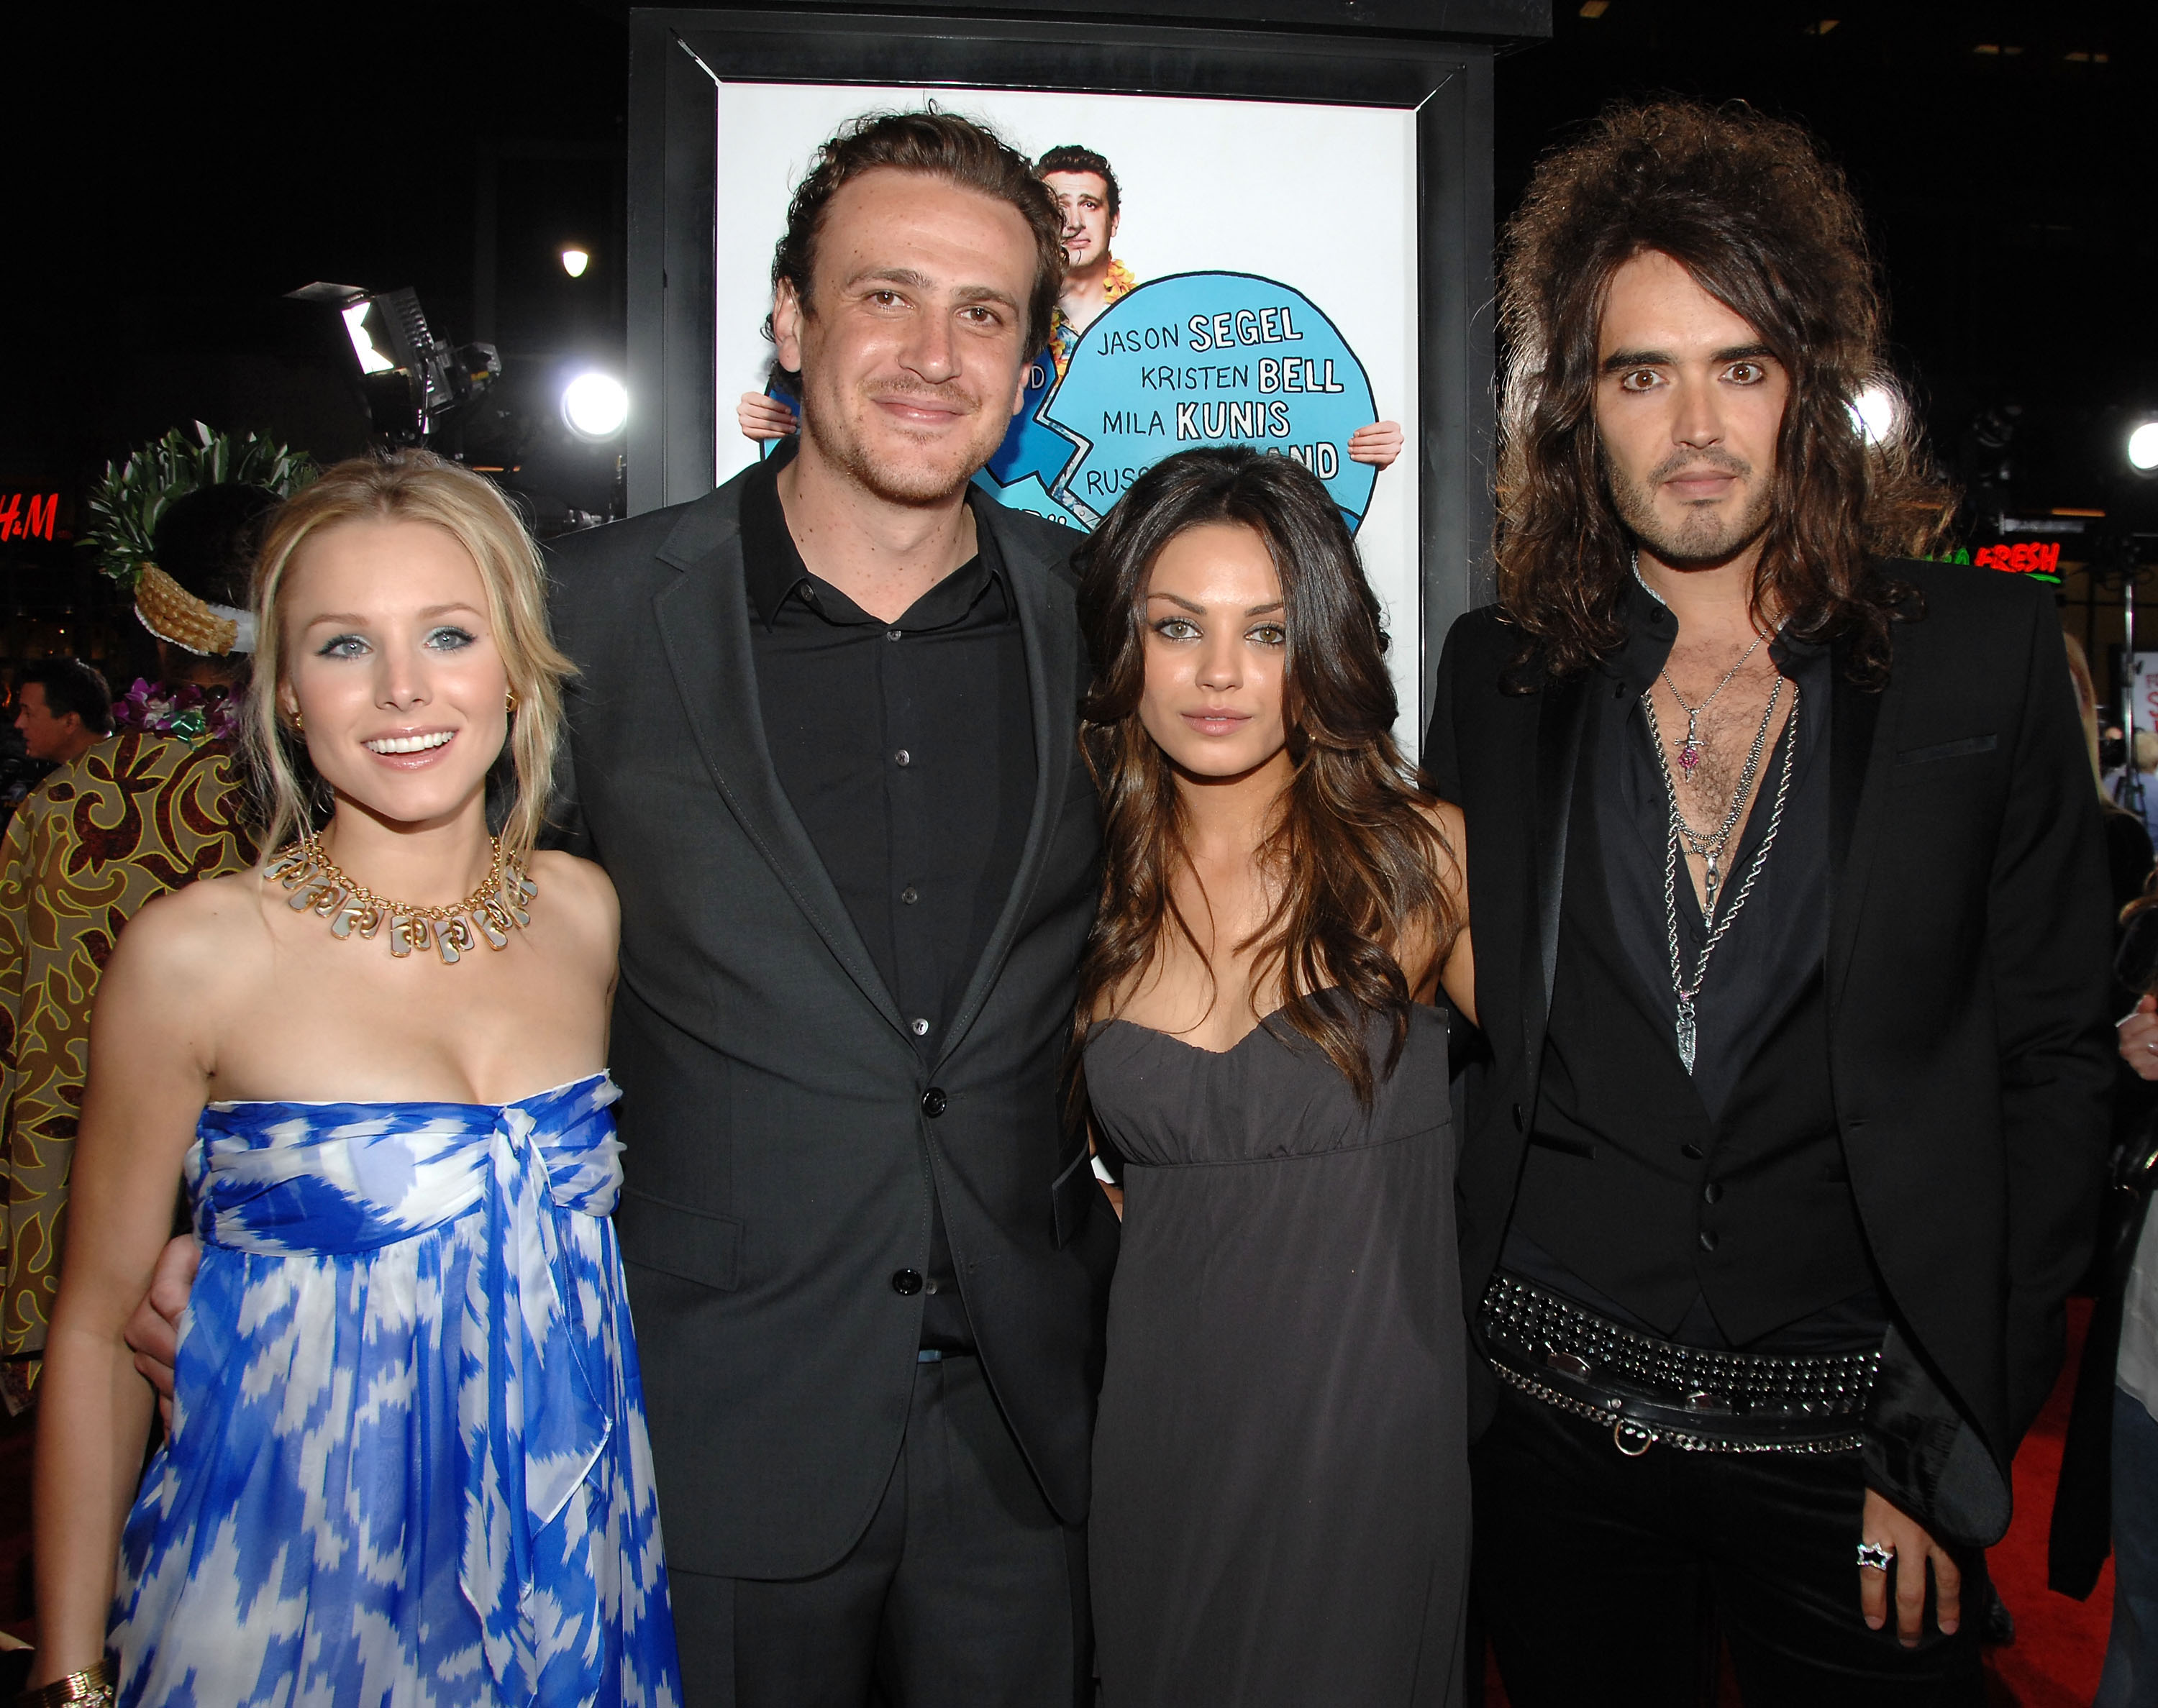 Kristen Bell threatened Russell Brand 'not to try anything' on set of  Forgetting Sarah Marshall